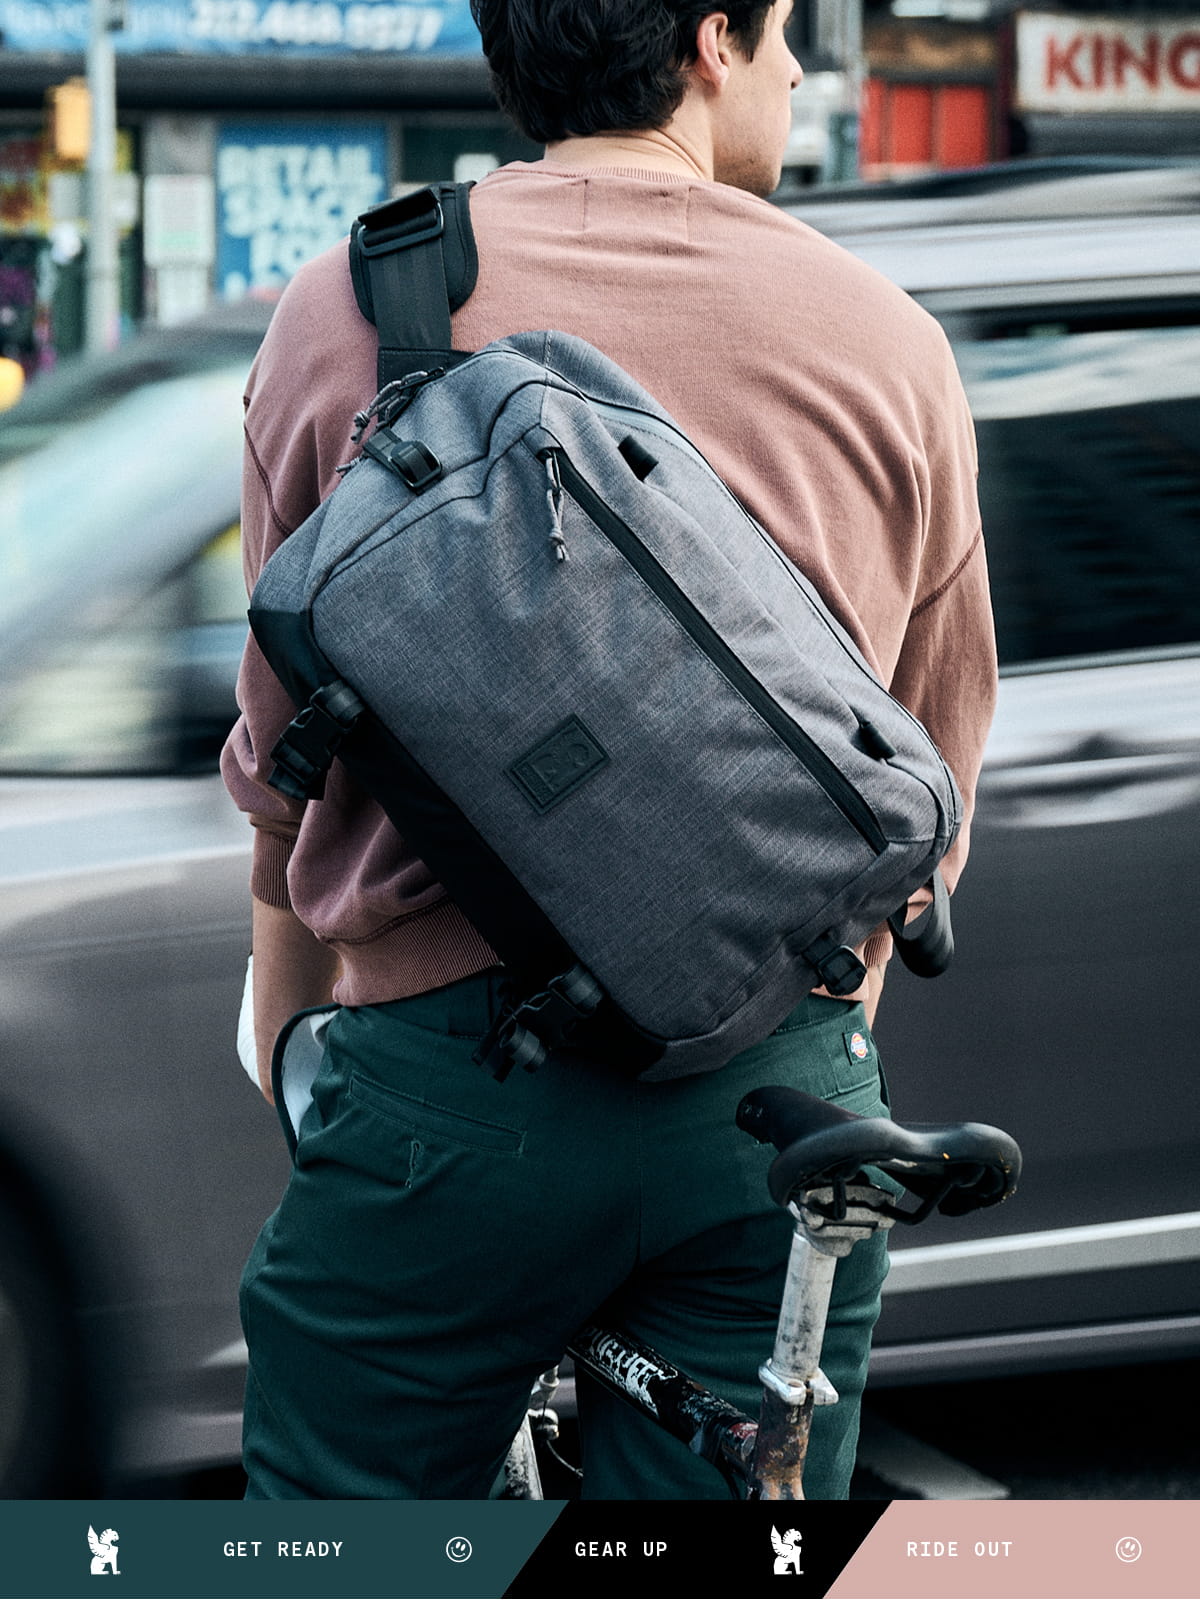 THE GEAR UP PACK. IT'S TIME TO KICK INTO HIGH GEAR